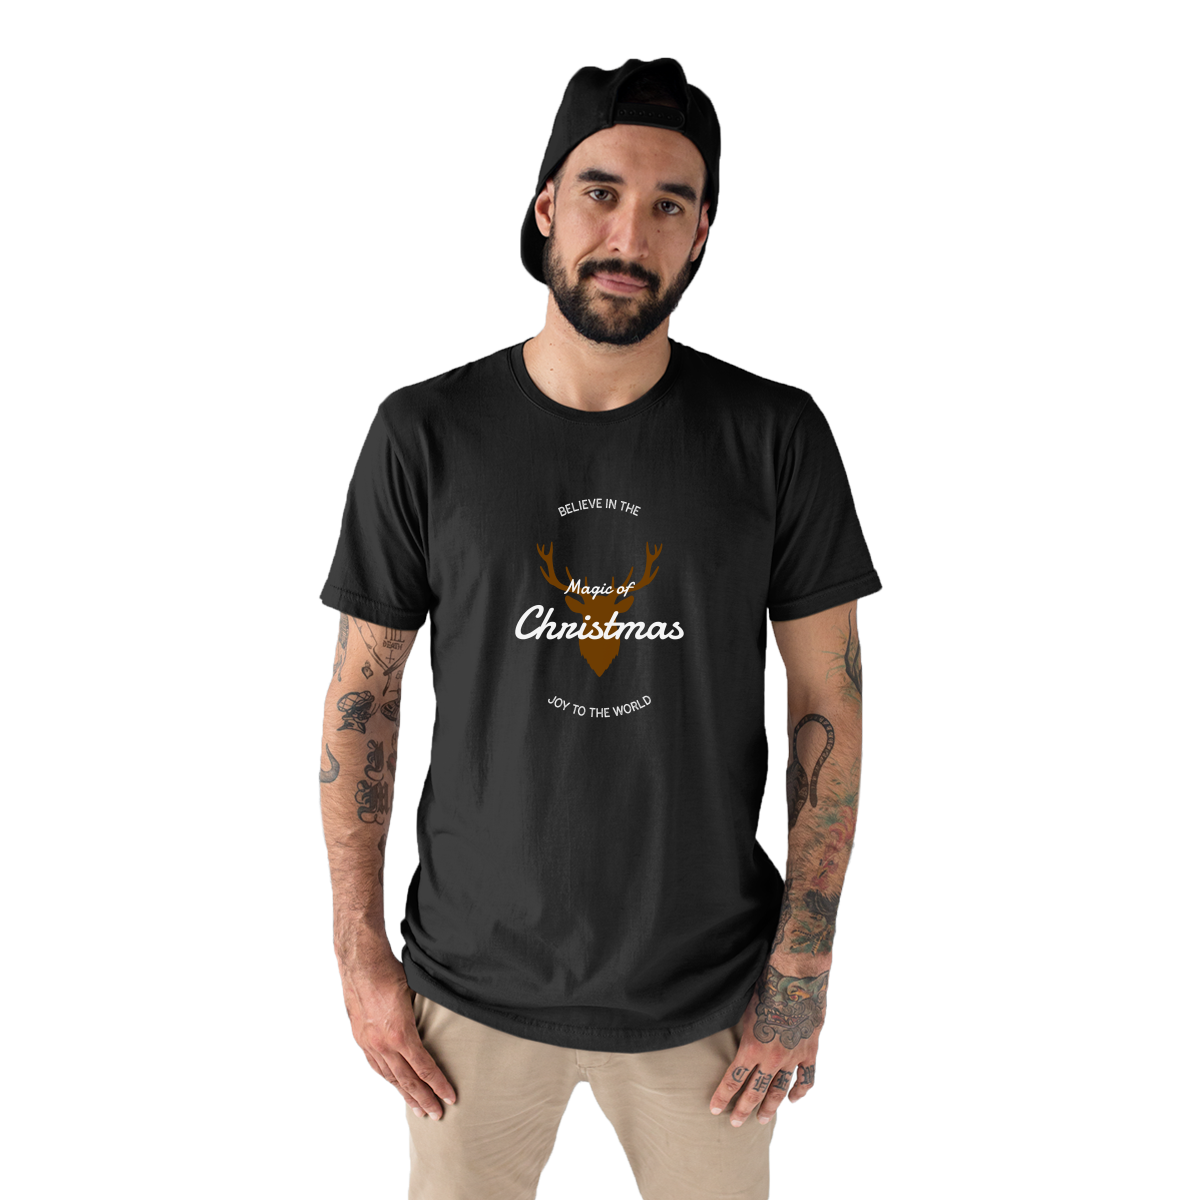 Believe in the Magic of Christmas Joy to the World Men's T-shirt | Black